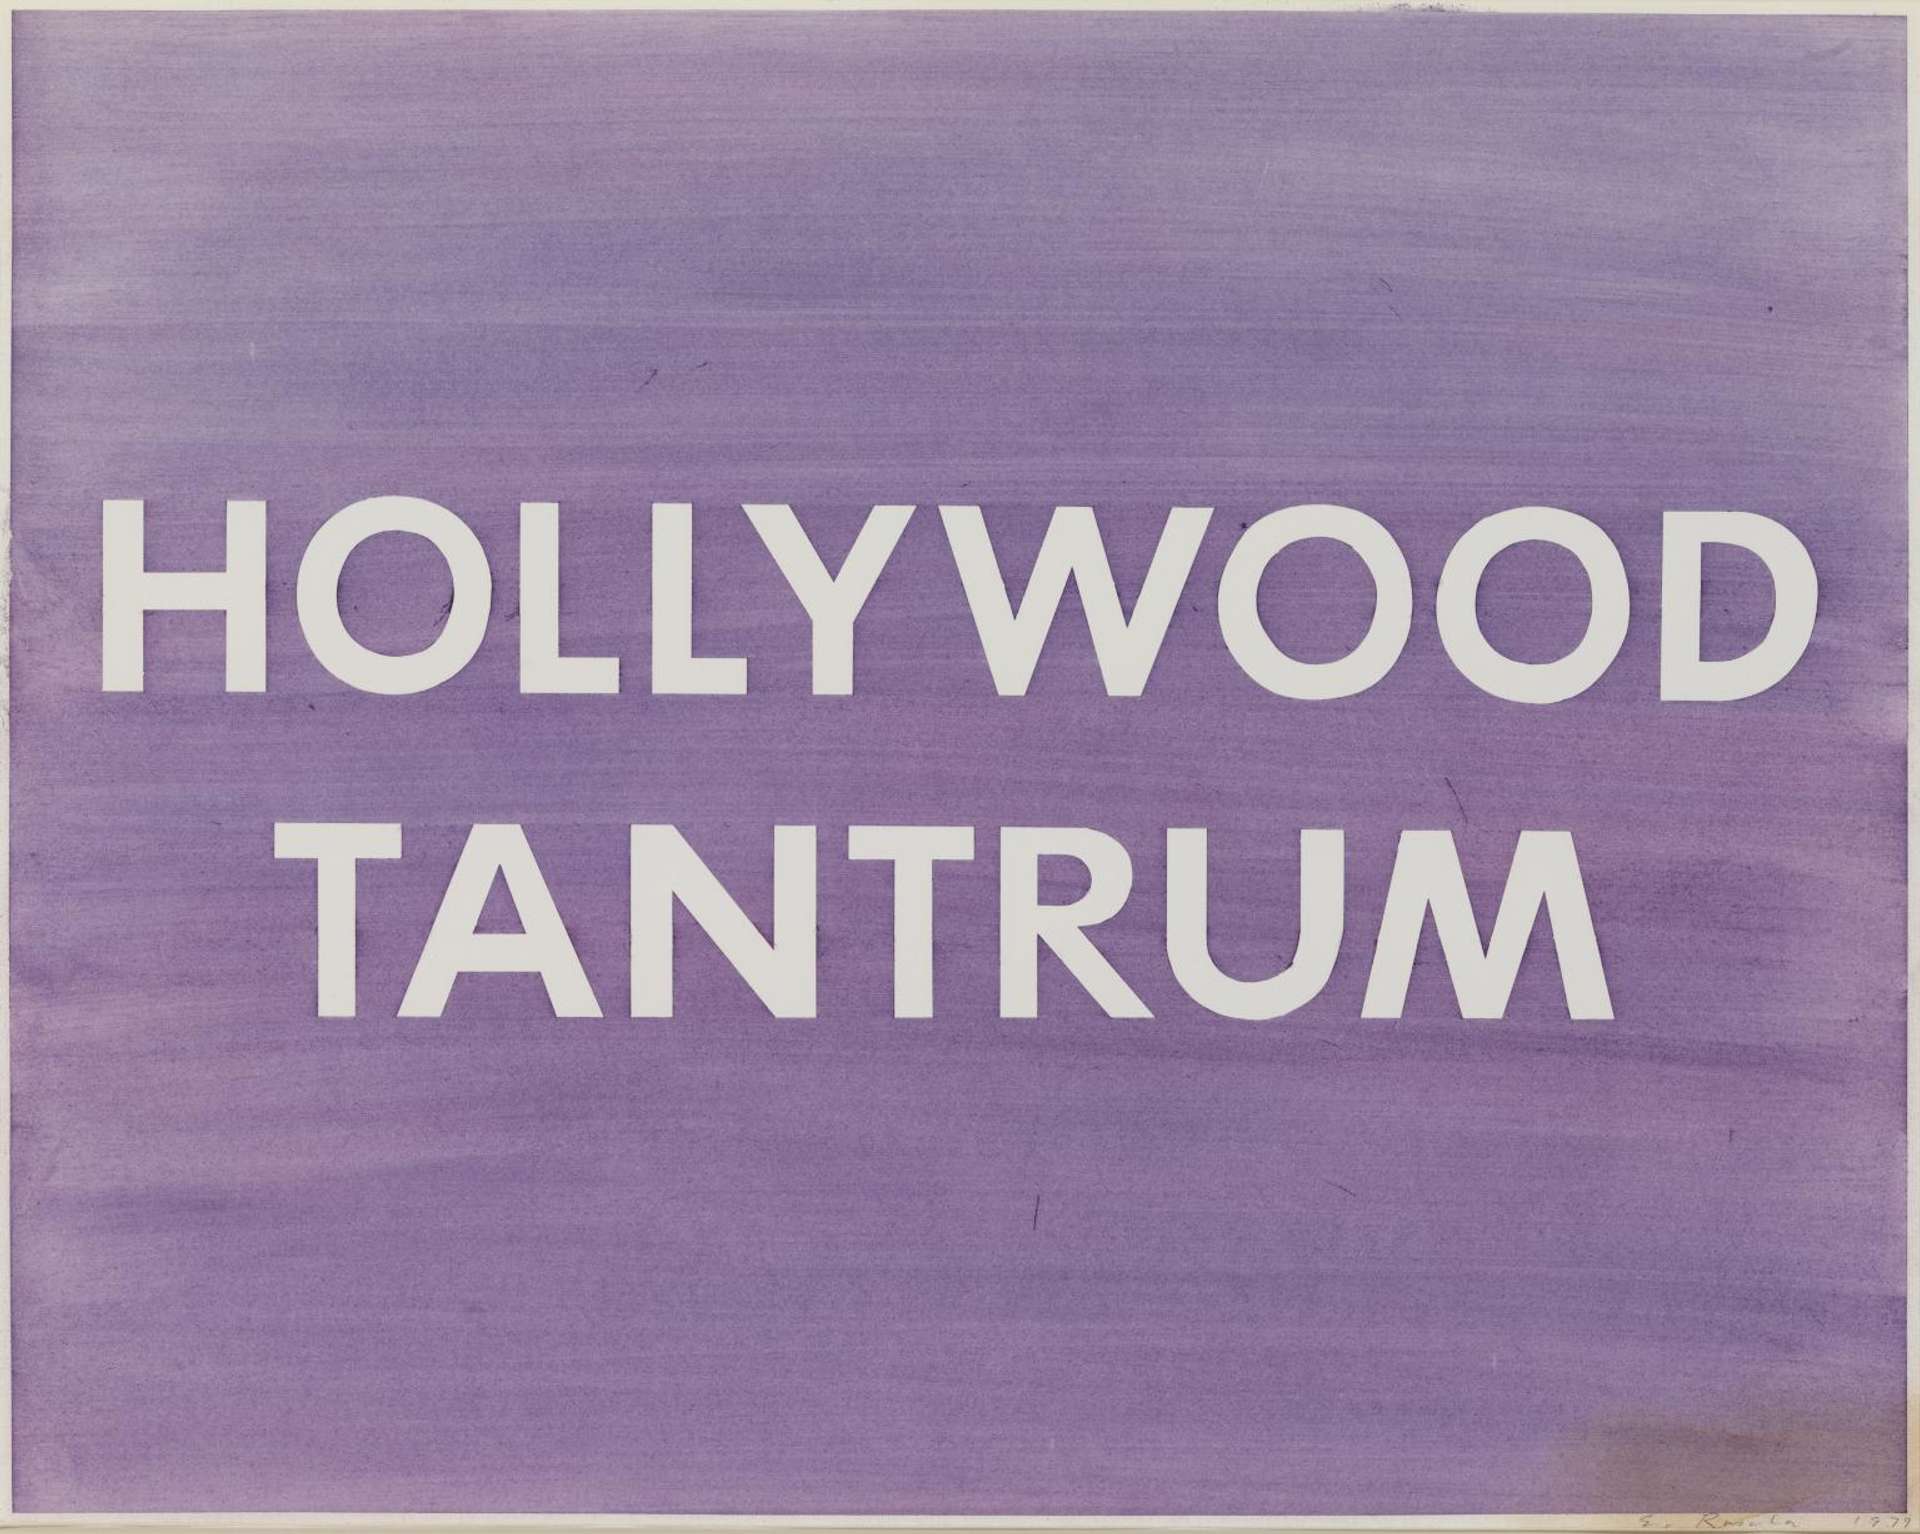 Pastel drawing of the words 'HOLLYWOOD TANTRUM' by Ed Ruscha against a lilac pastel background.